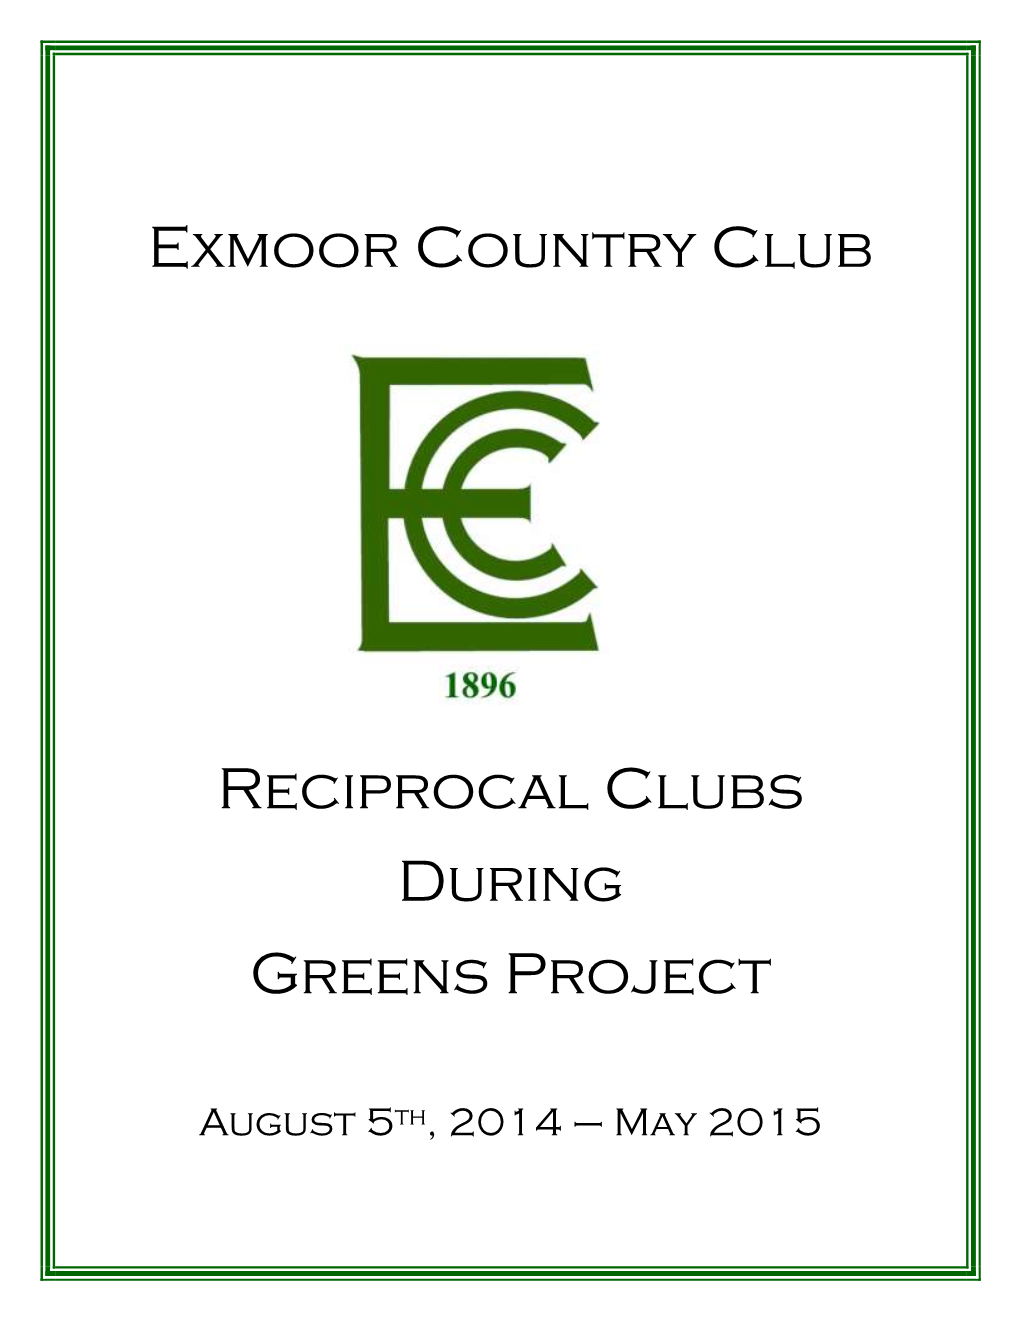 Exmoor Country Club Reciprocal Clubs During Greens Project